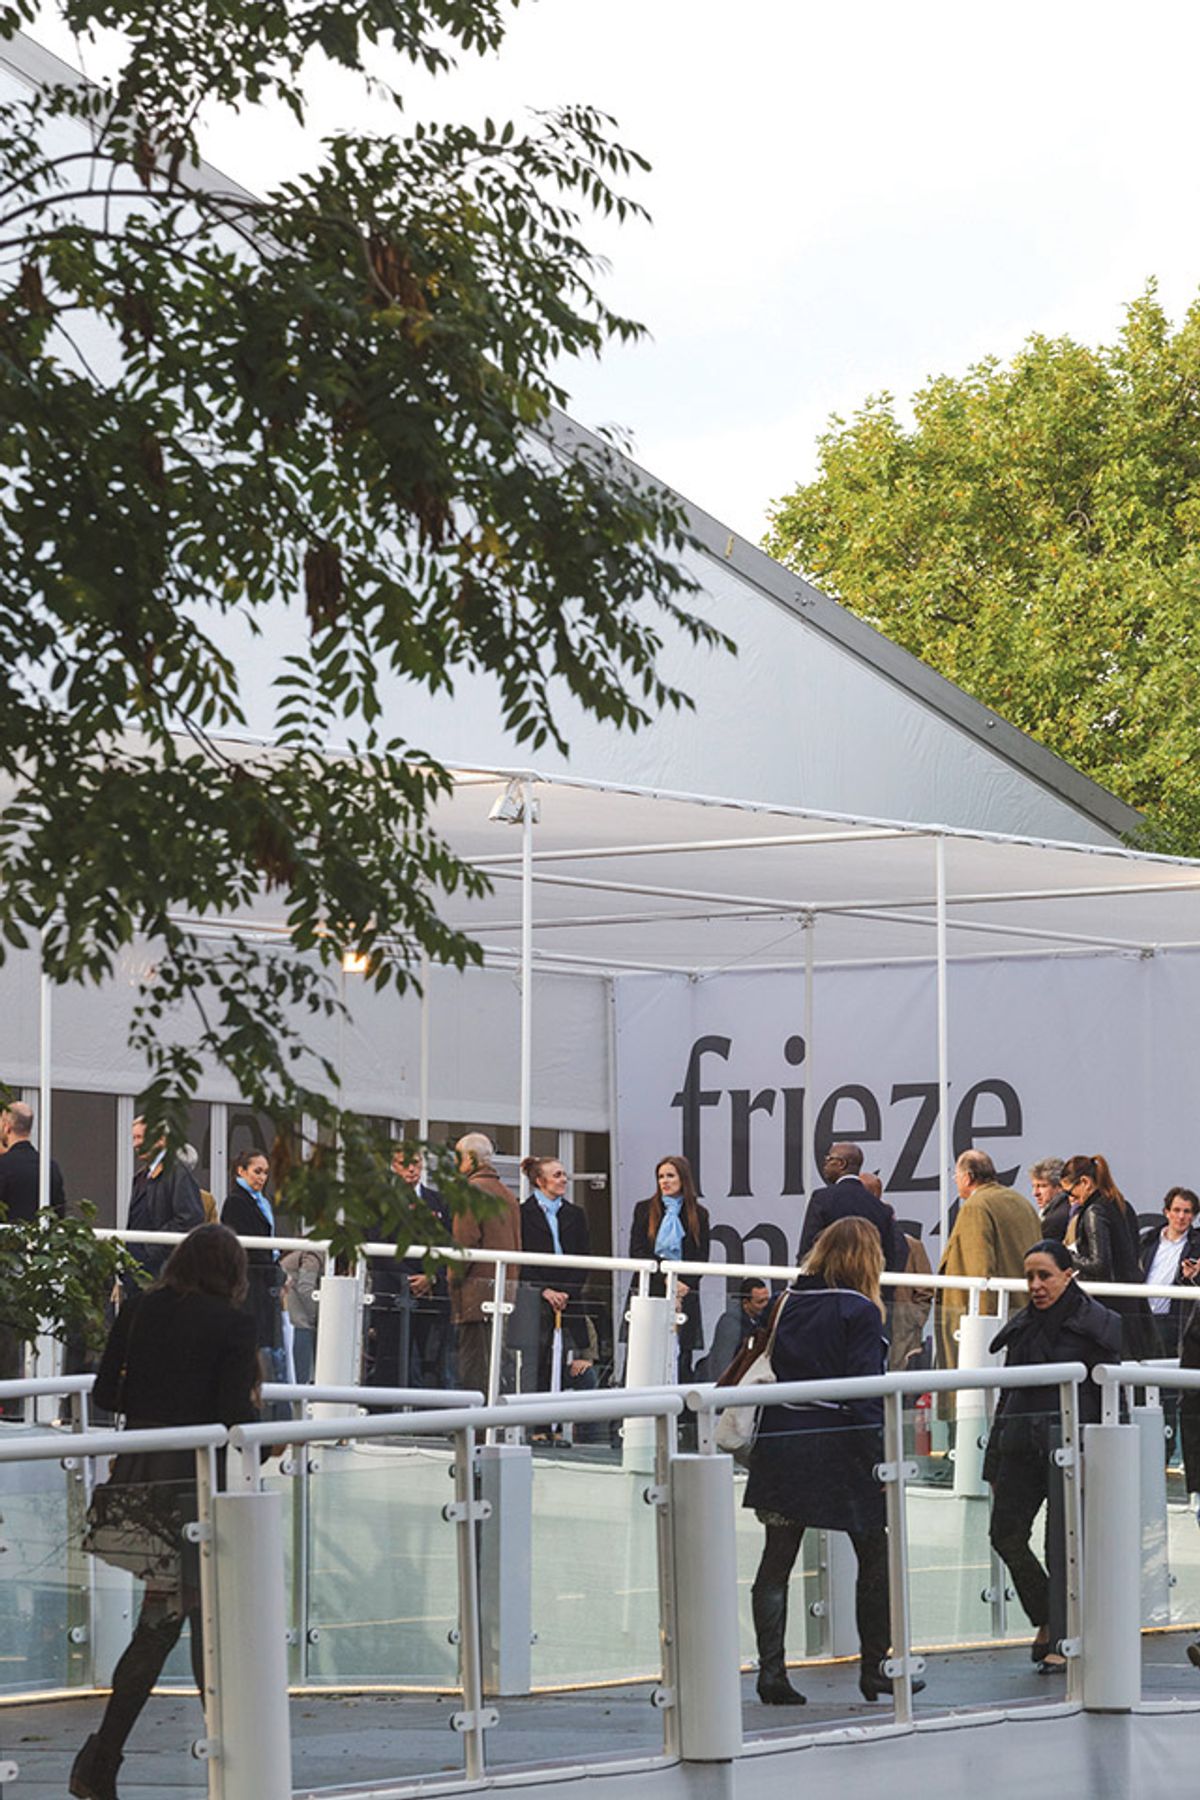 The impact of factors including soaring energy costs and runaway inflation could encourage organisers of fairs such as Frieze to consider moving to greener options Photo: Joe Clark; Courtesy Frieze